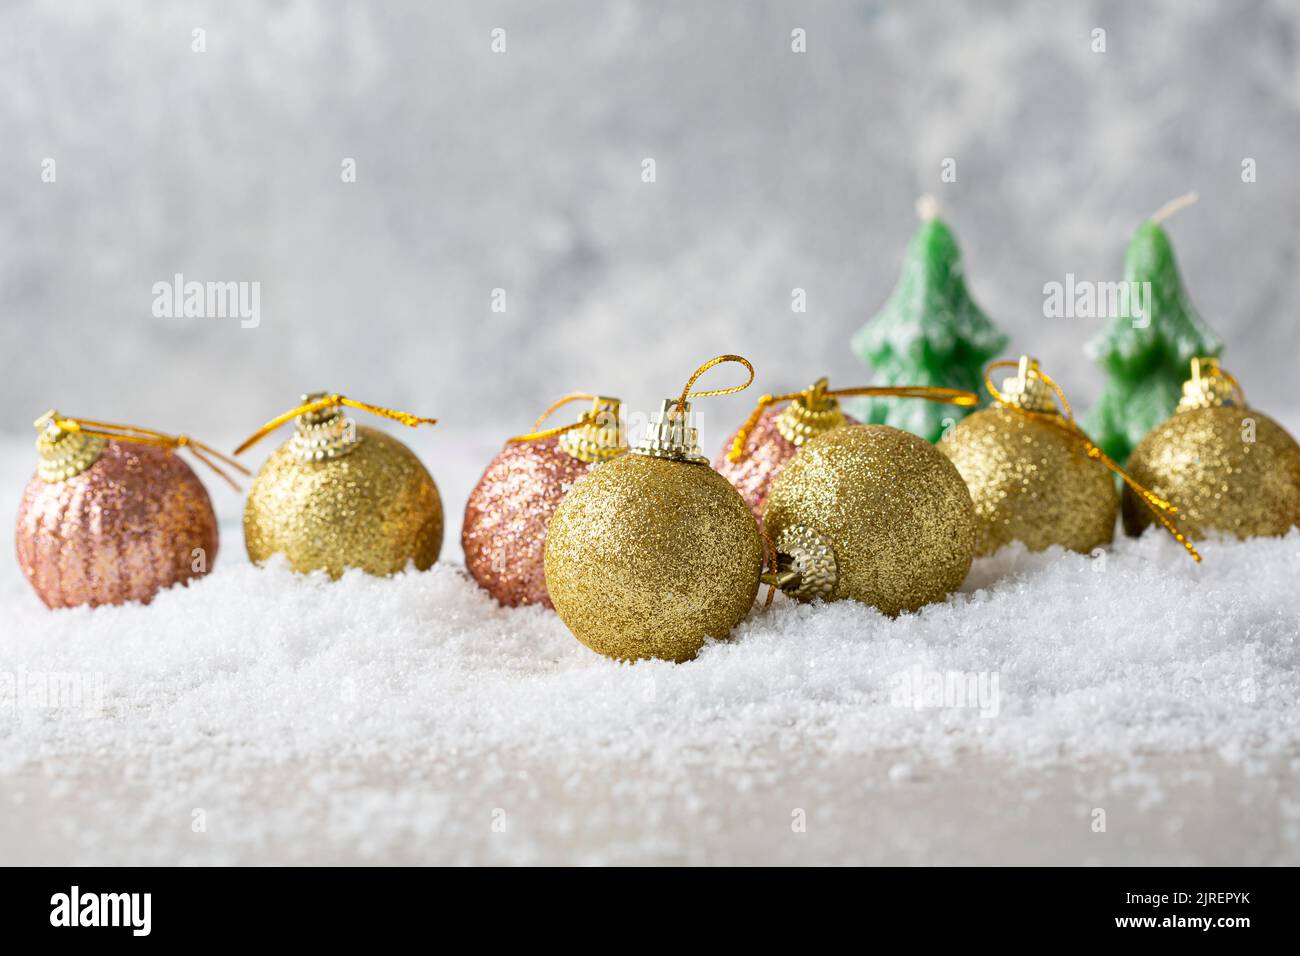 Christmas tree candles and decorations on snow fholiday concept Stock Photo